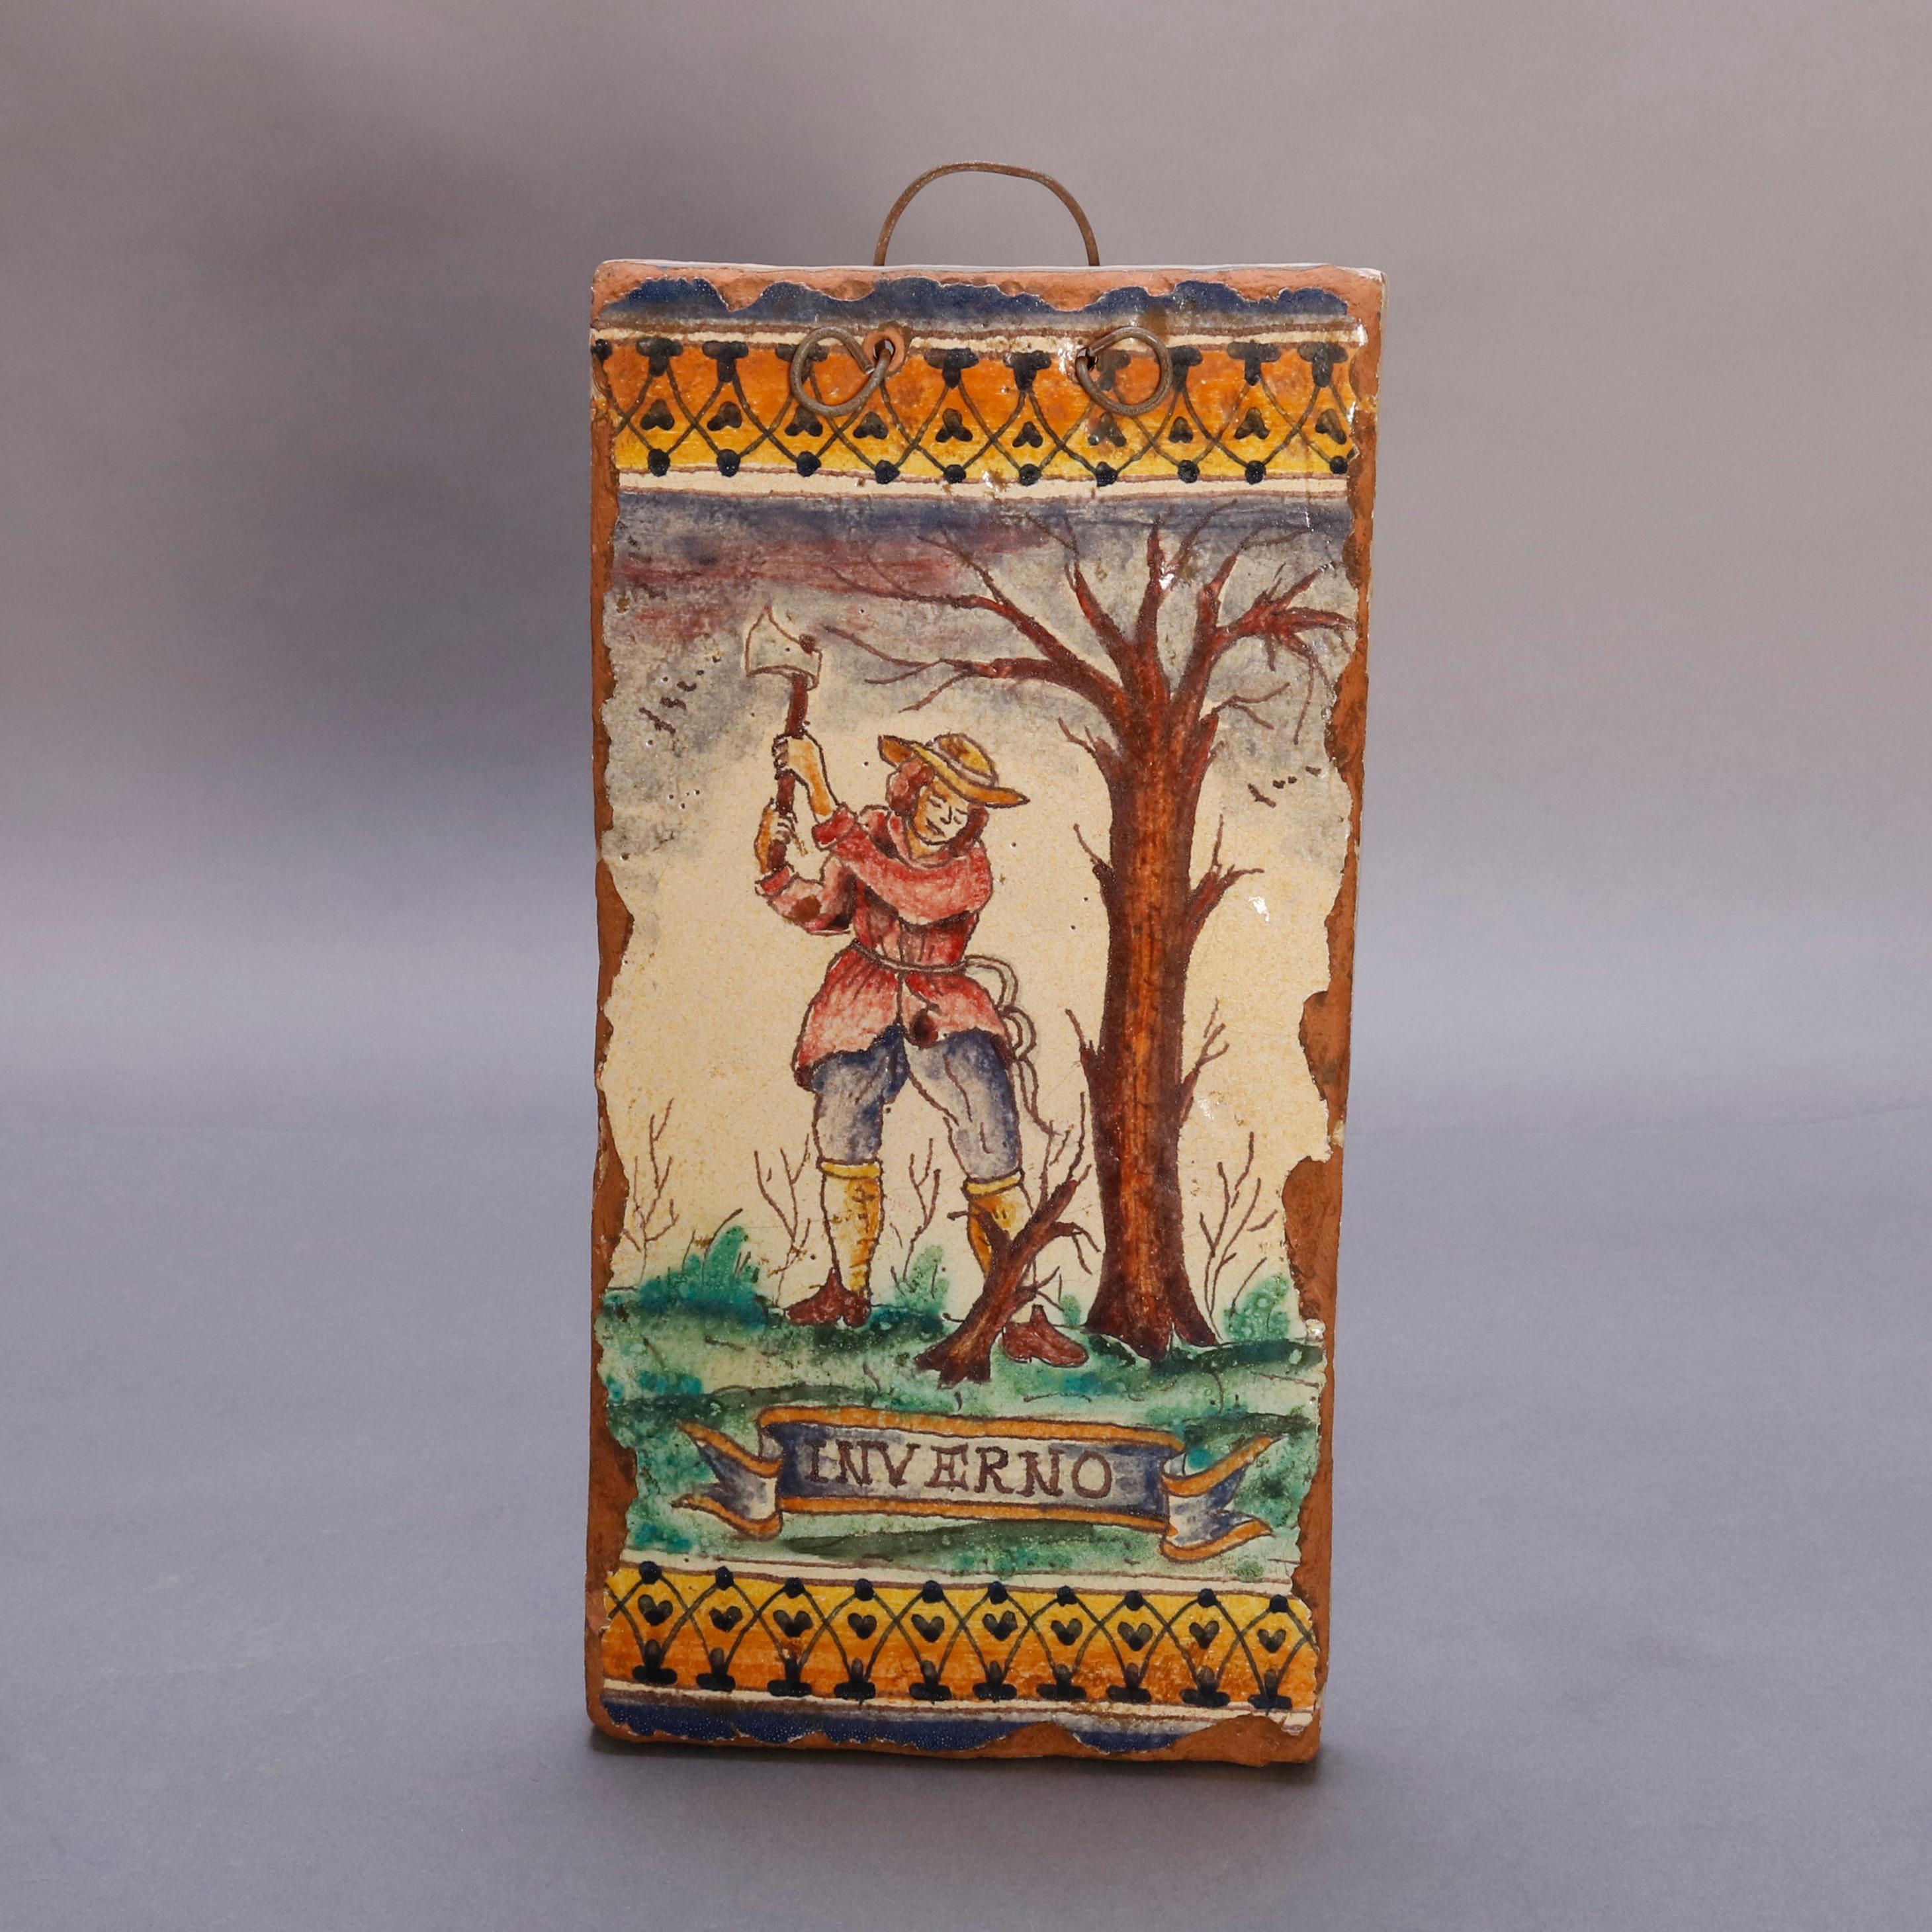 An antique set of Italian Majolica pottery tiles offer hand painted and titled scenes of the Four Seasons with figures in landscape setting; set includes 